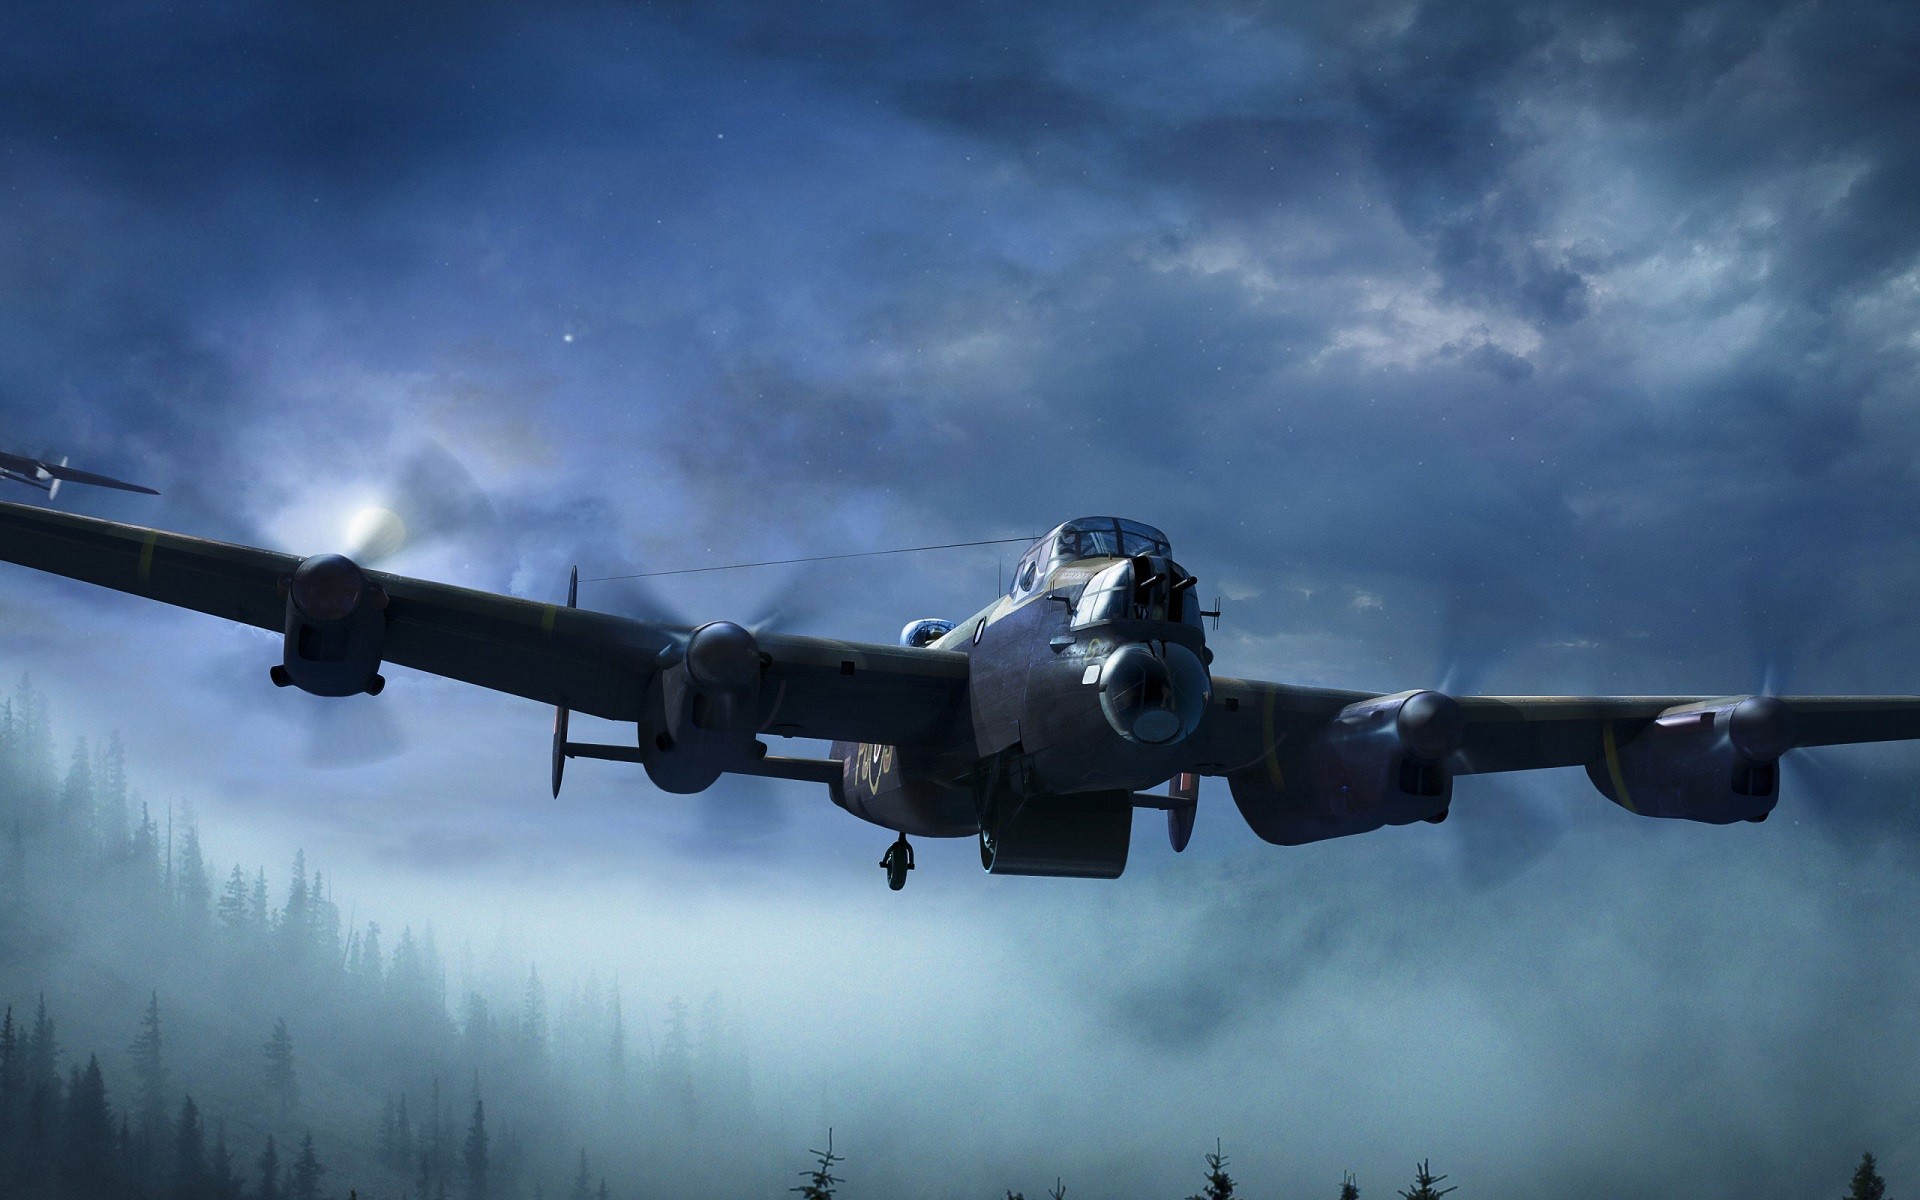 General 1920x1200 aircraft Avro Lancaster military military aircraft Warbird vehicle military vehicle artwork British aircraft Bomber mist sky flying clouds trees forest